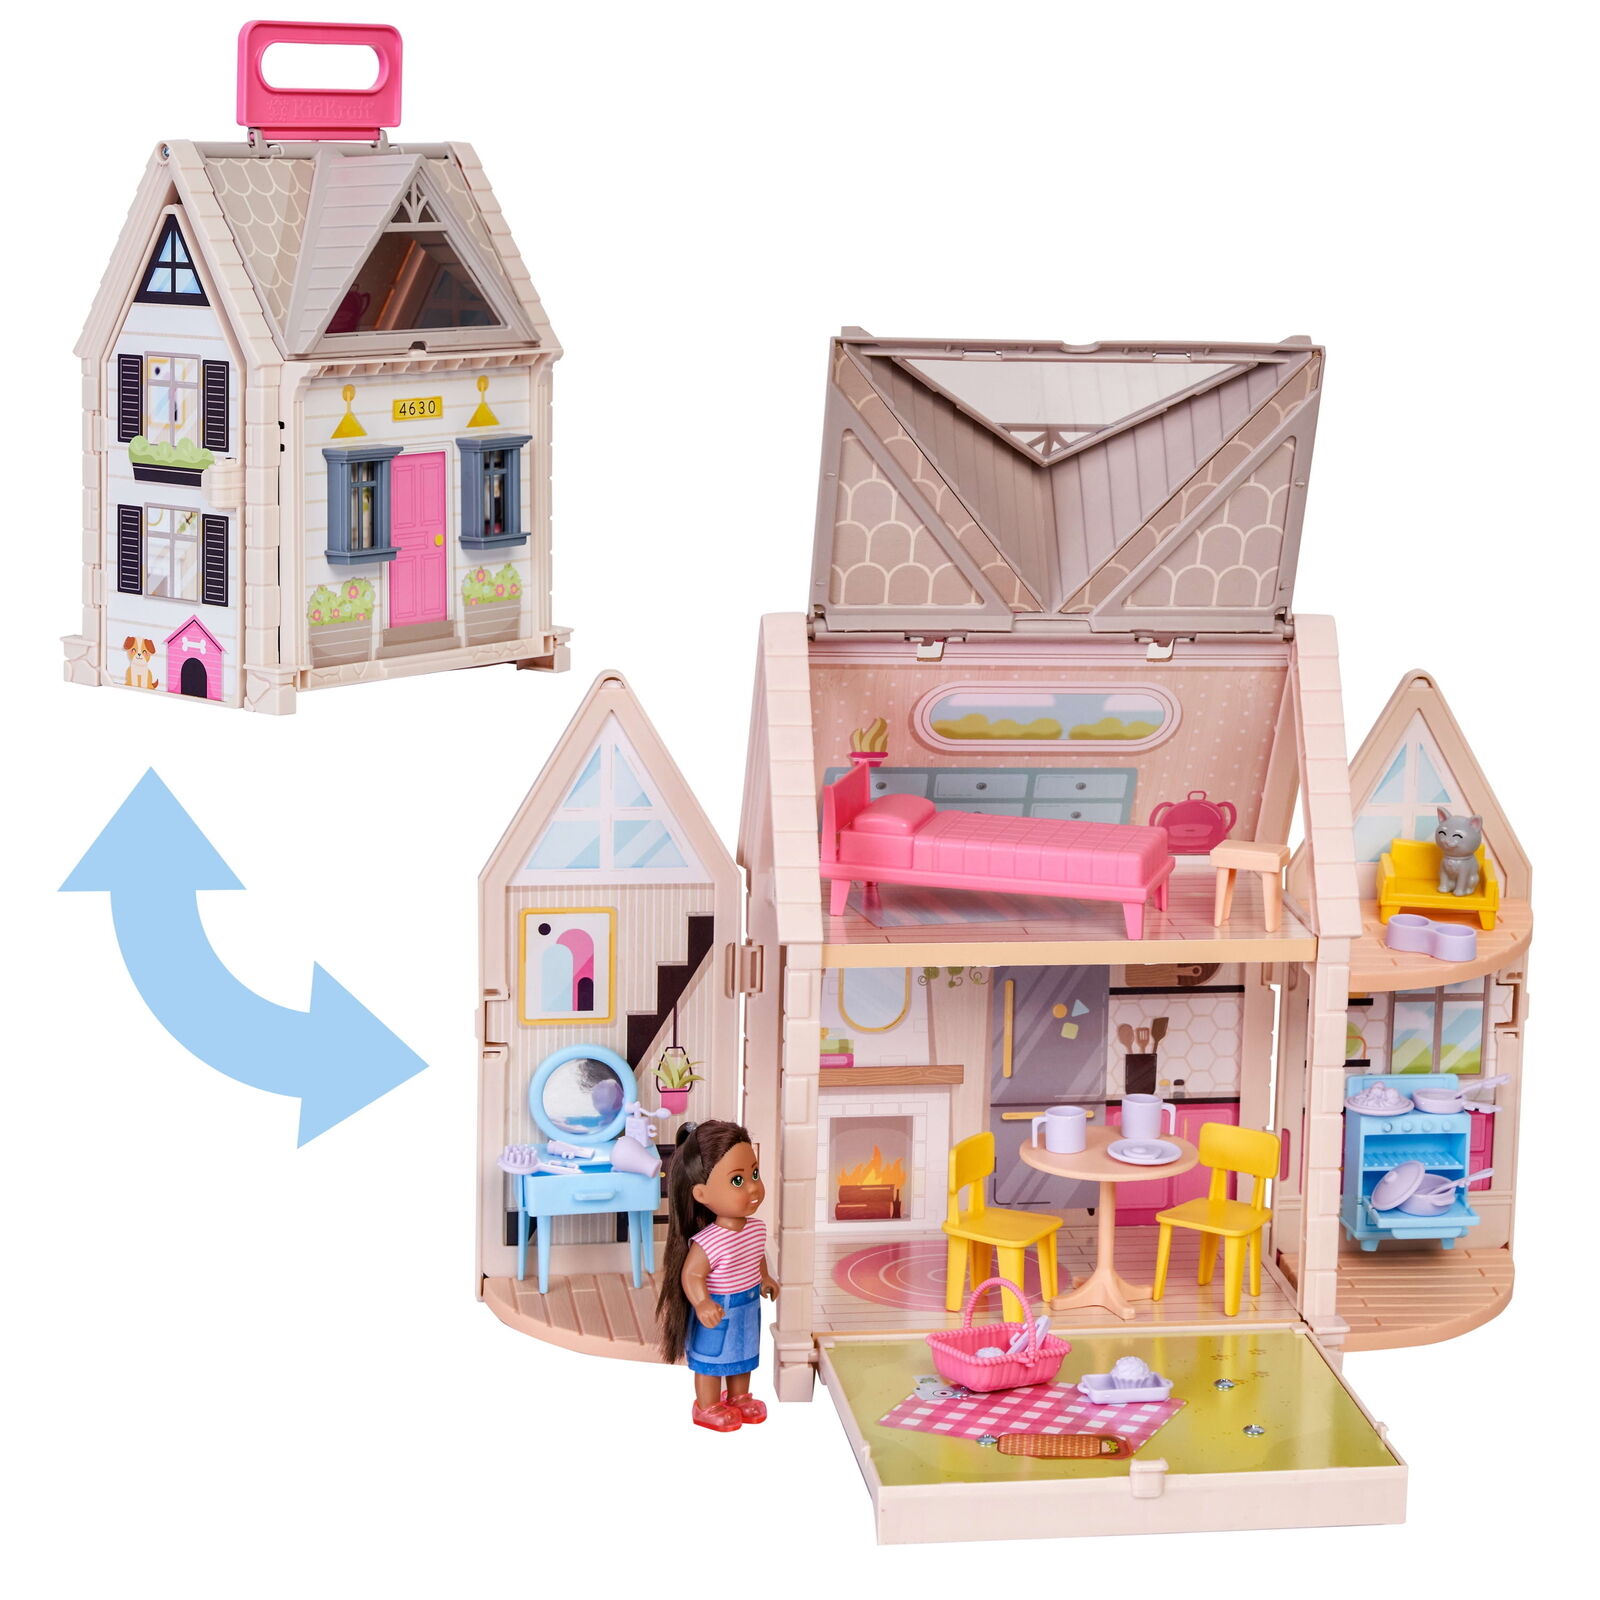 Tote-ables™ Portable Cottage Dollhouse with Doll Included